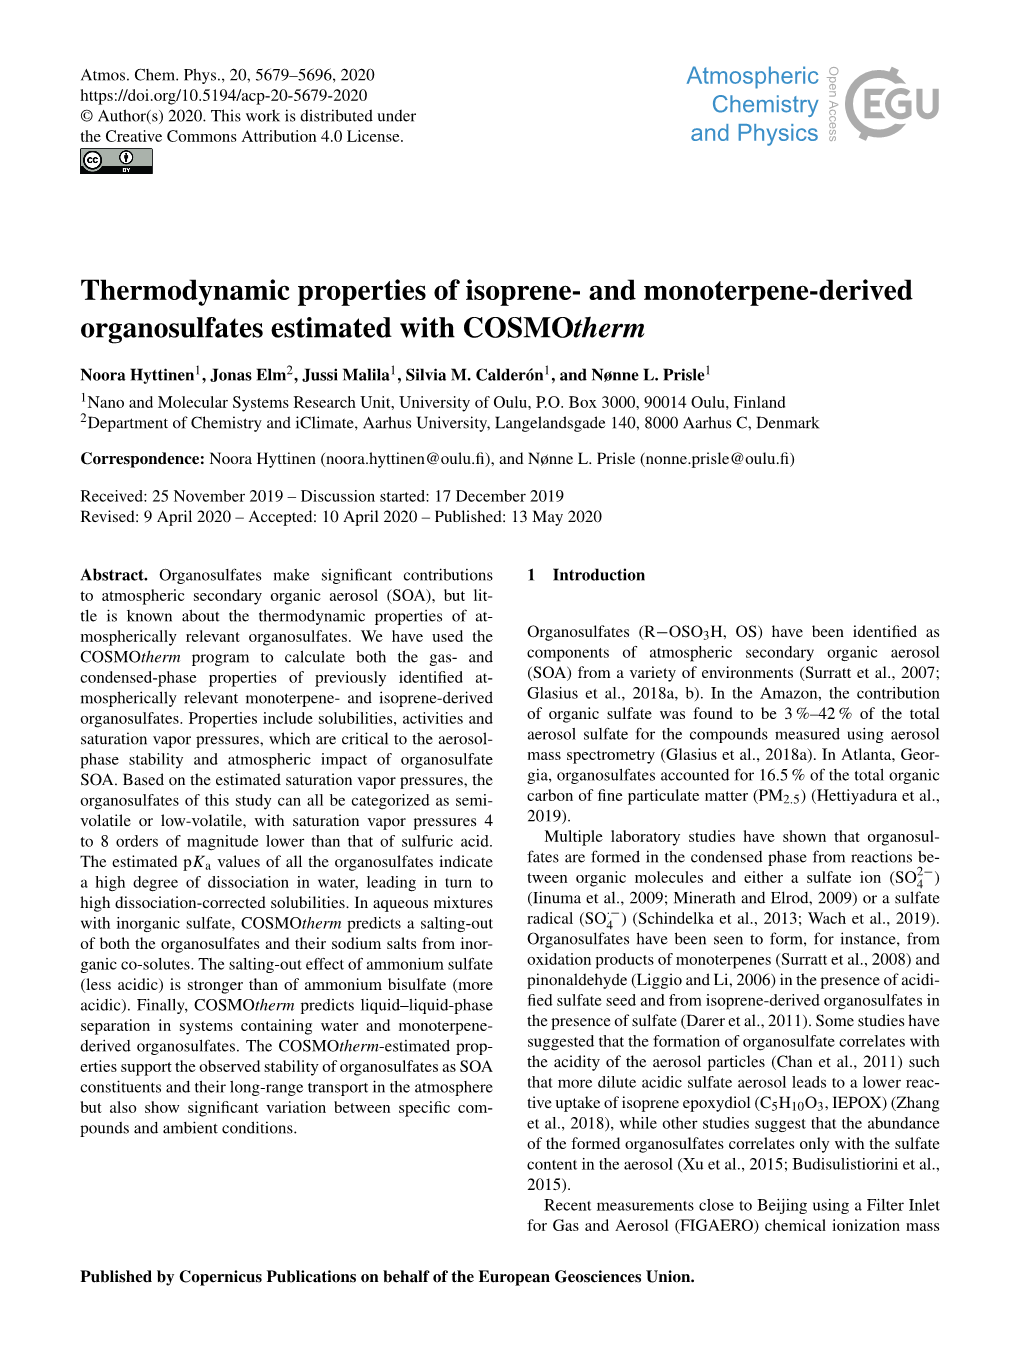 Thermodynamic Properties of Isoprene- and Monoterpene-Derived Organosulfates Estimated with Cosmotherm